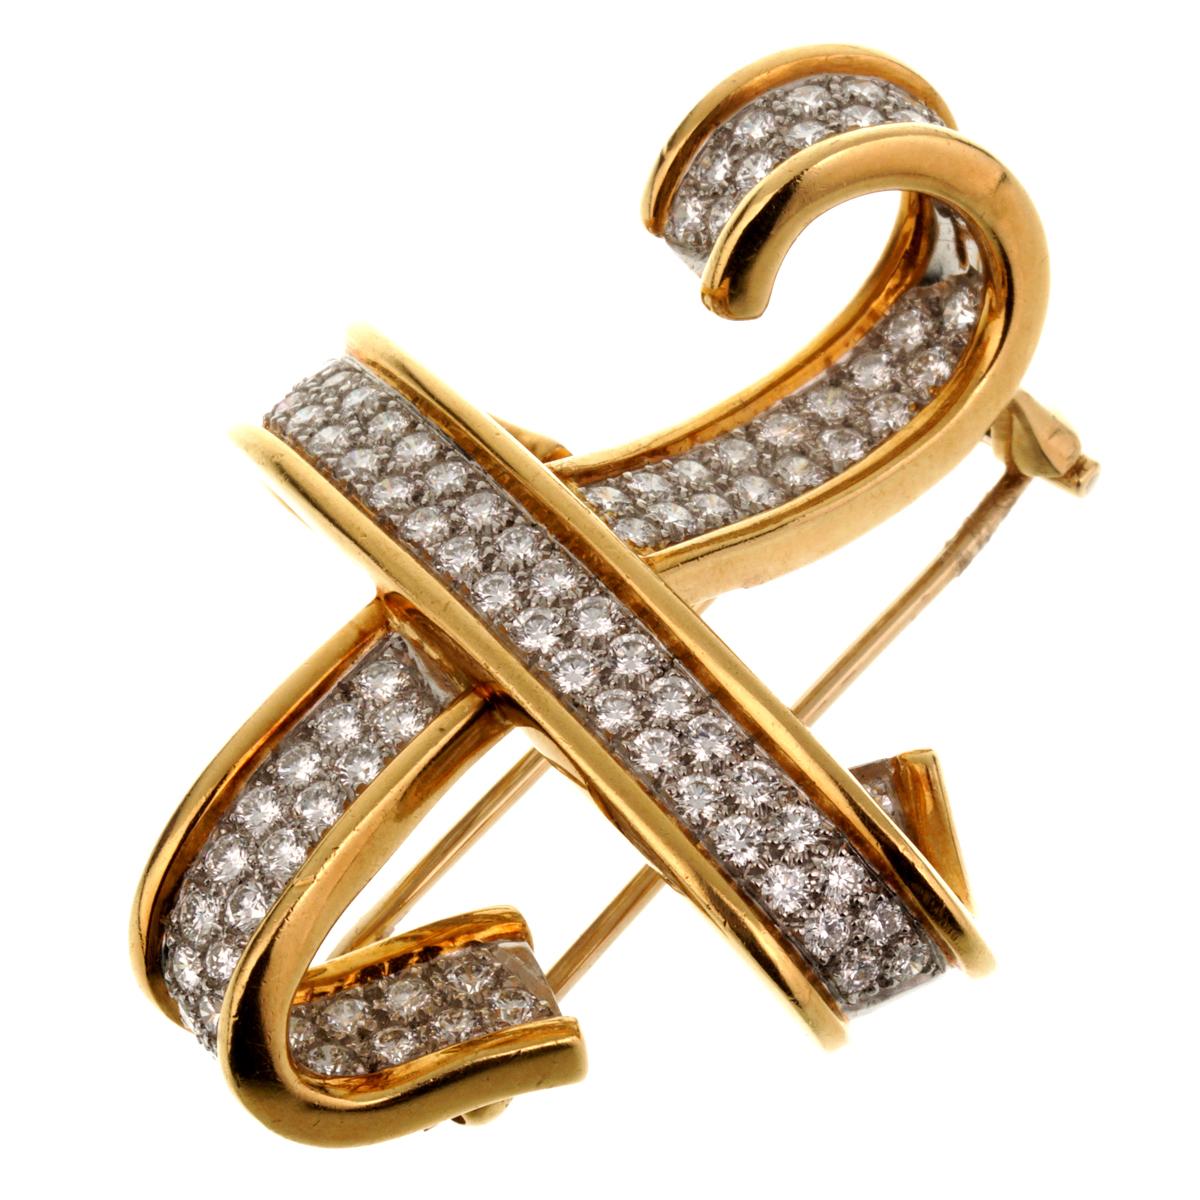 A fabulous authentic Tiffany & Co brooch designed by Paloma Picasso showcasing a 2ct of the finest round brilliant cut diamonds set in platinum. The frame is designed in 18k yellow gold. Circa 1988